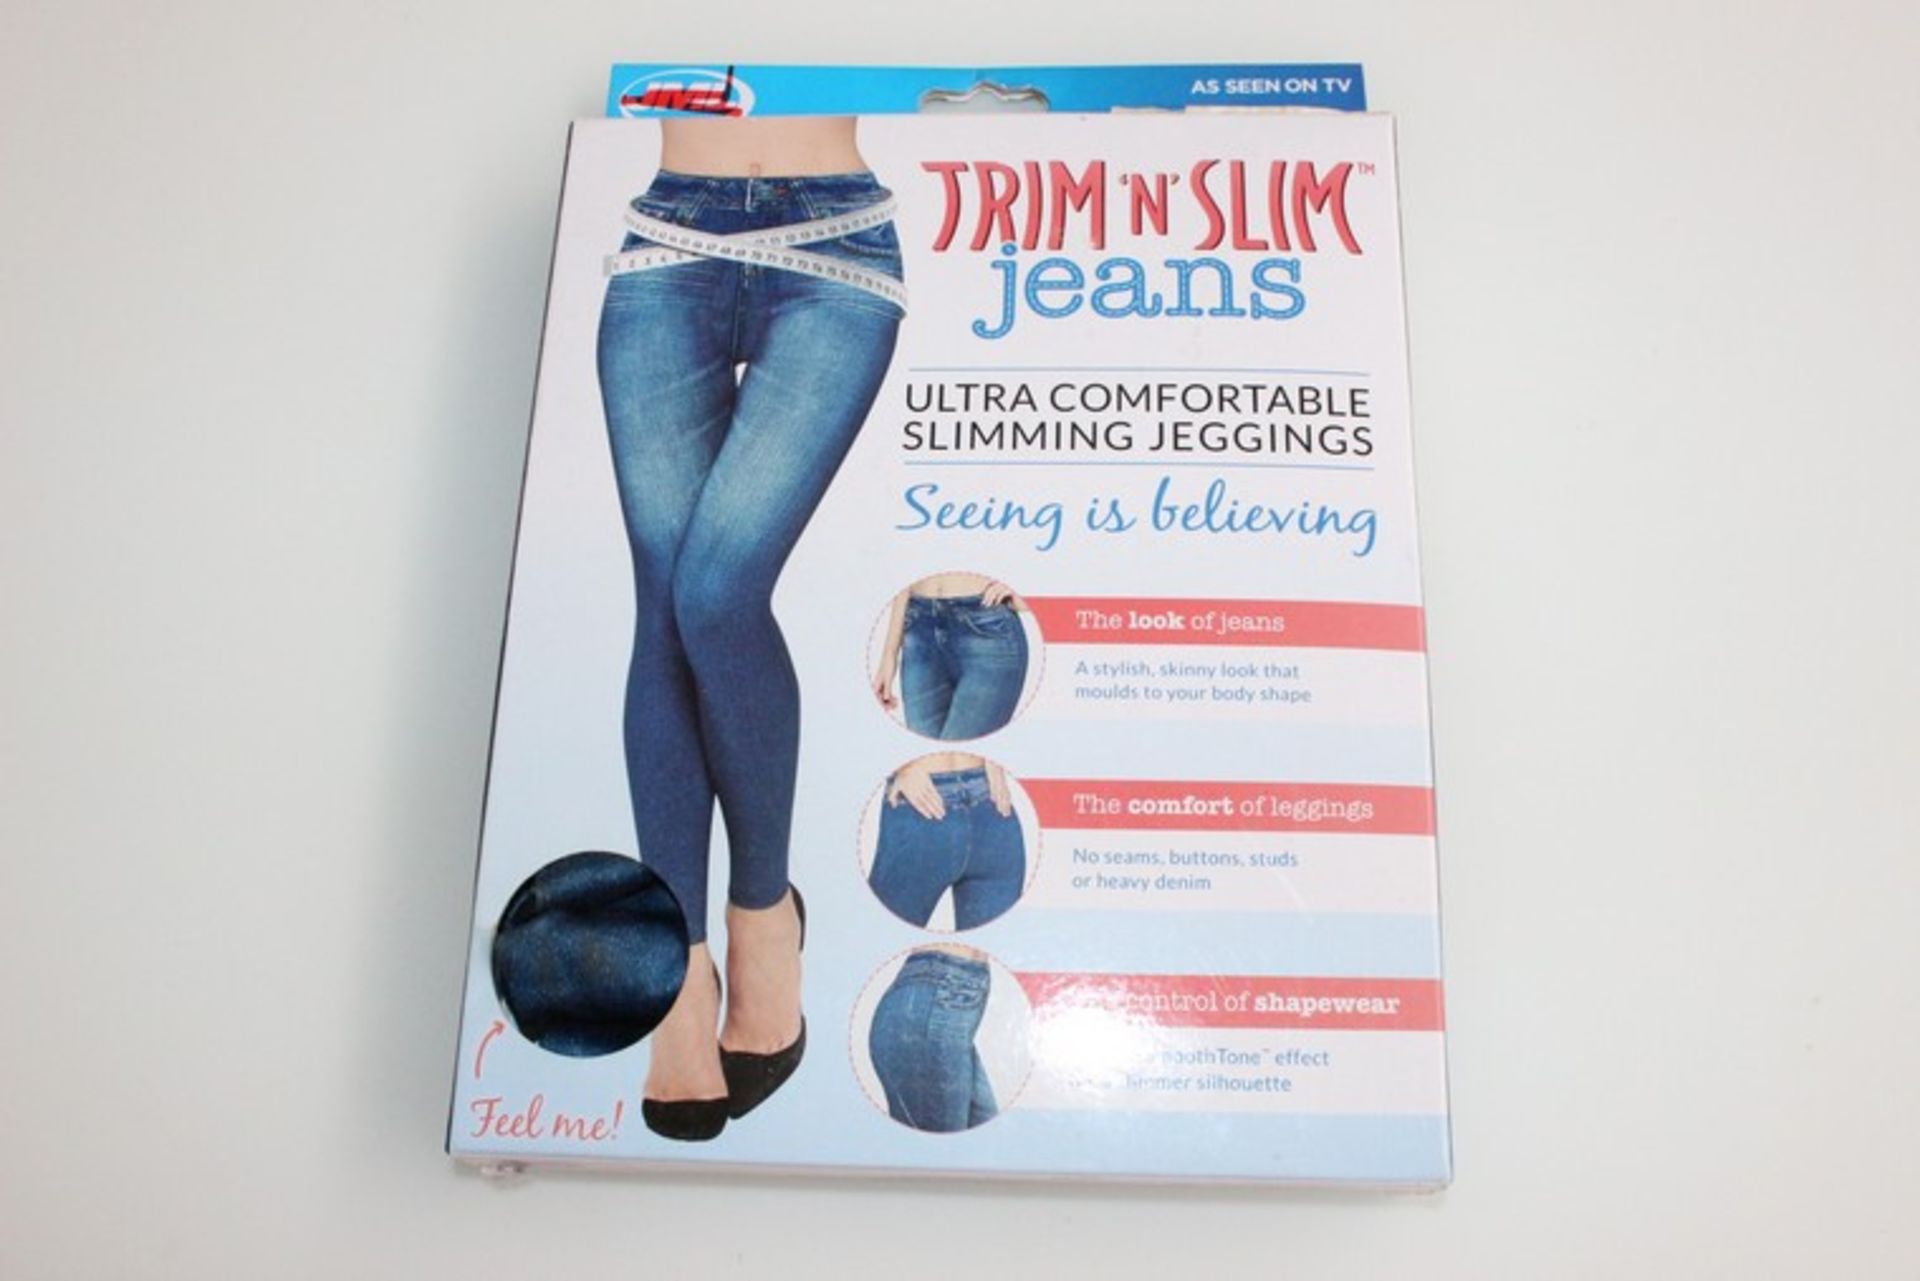 10 x TRIM AND SLIM ULTRA COMFORTABLE SLIMMING JEANS (31.5.17) *PLEASE NOTE THAT THE BID PRICE IS